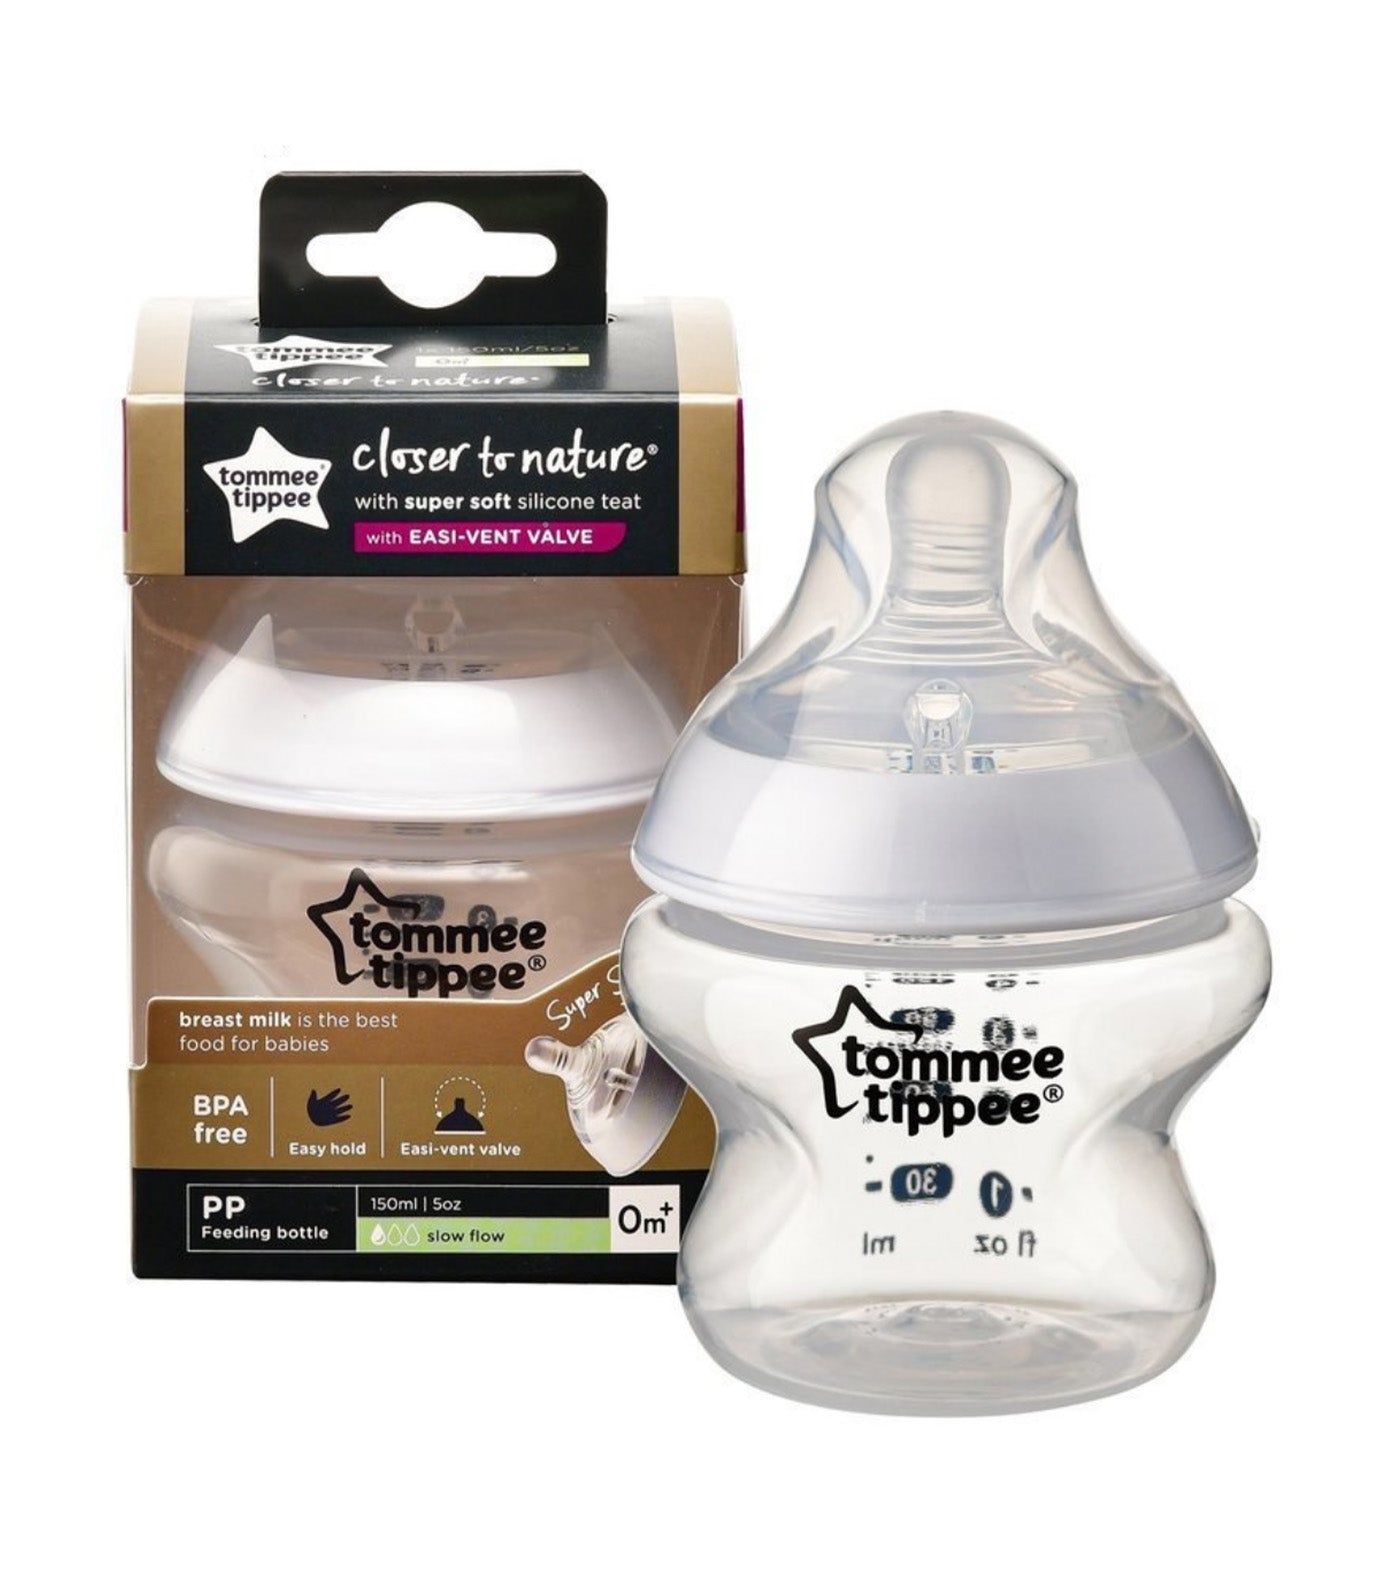 Closer to Nature PP Bottle White